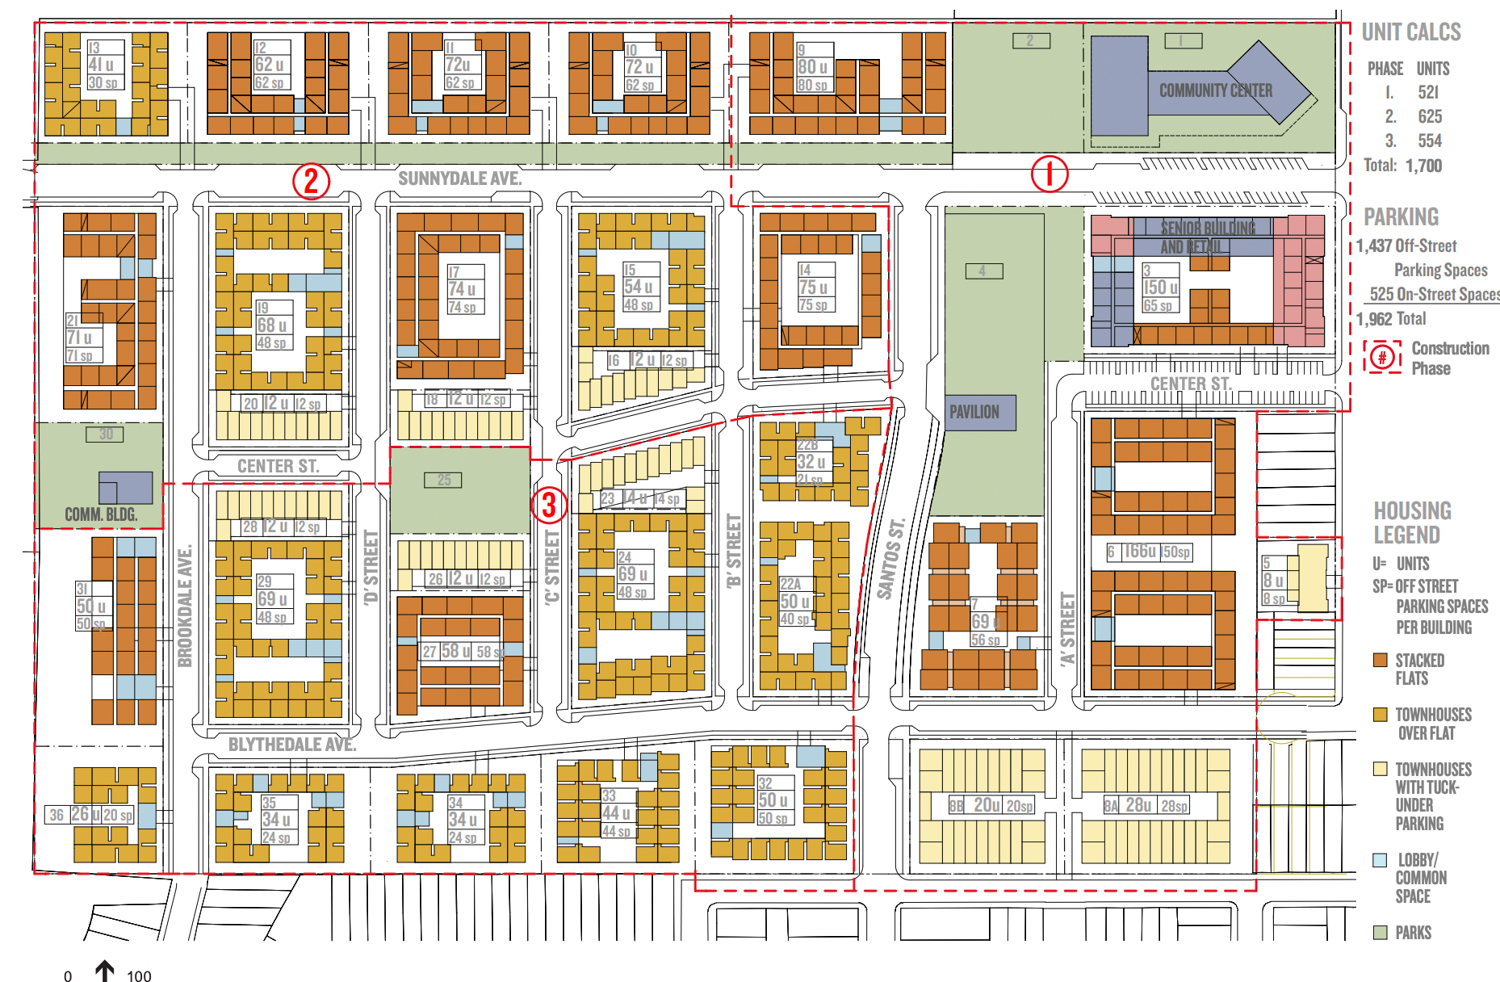 Sunnydale HOPE SF master site plan, development by Related California and Mercy Housing